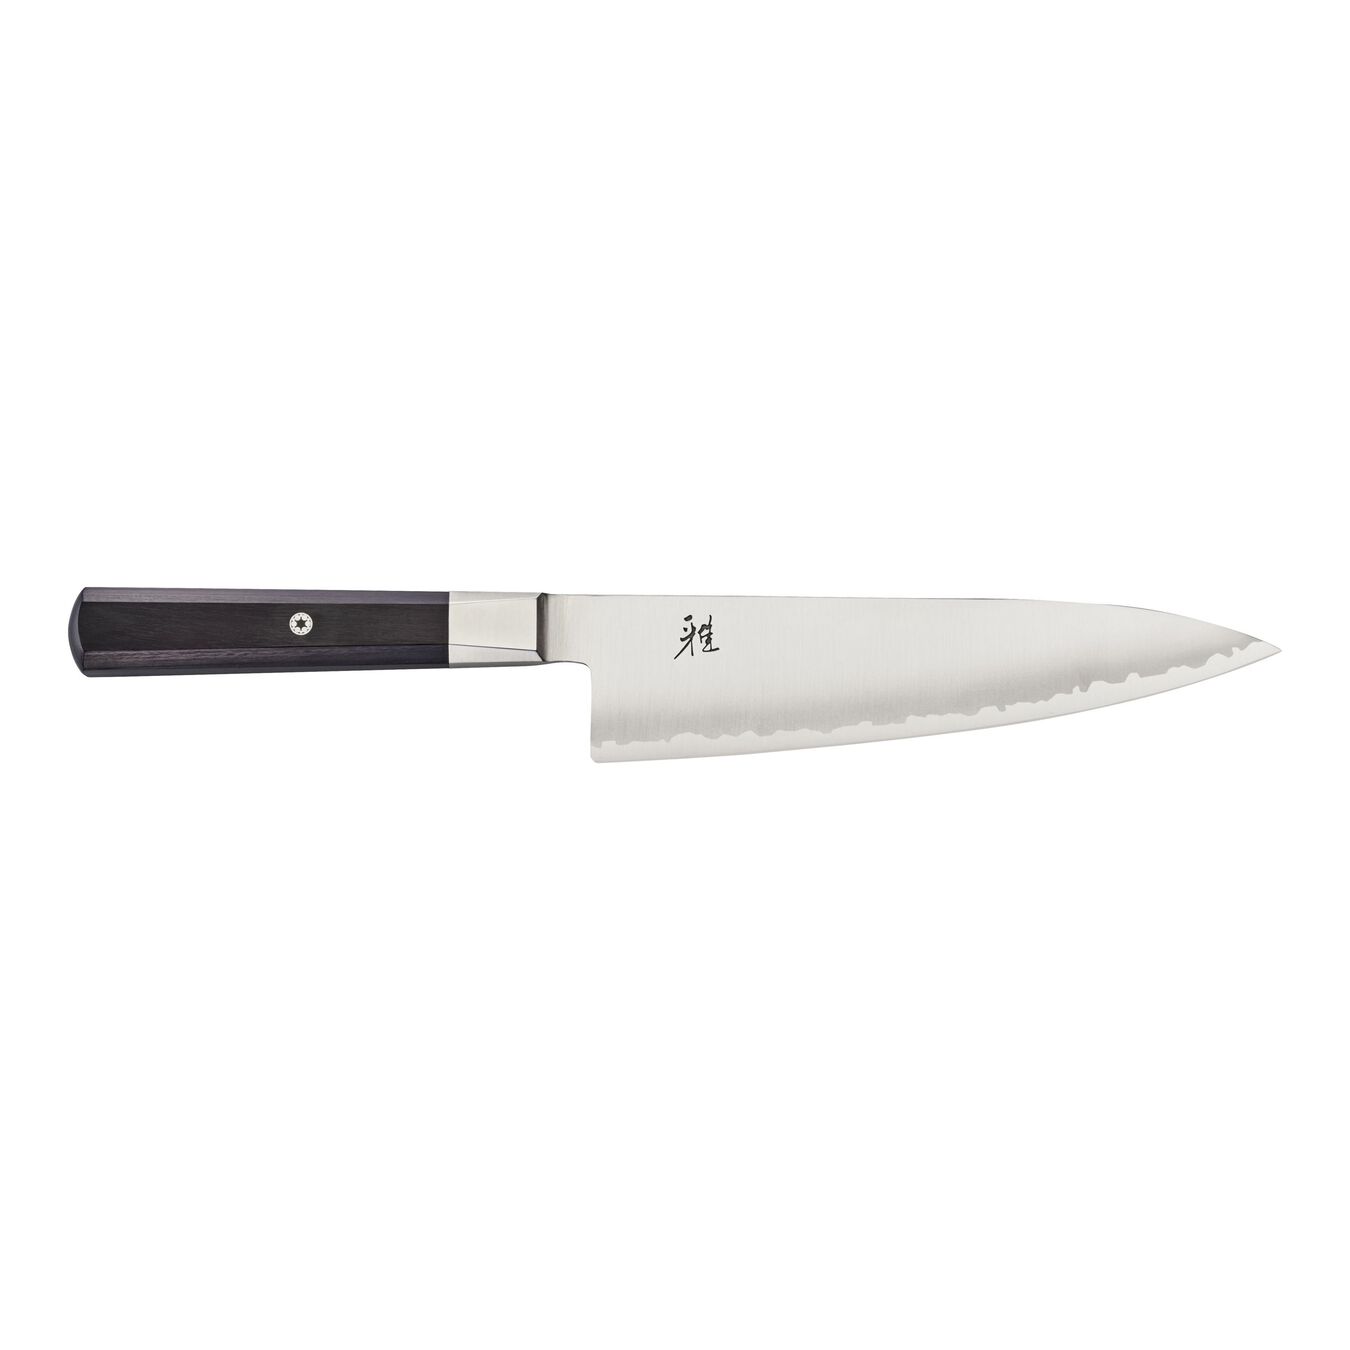 8-inch, Chef's Knife,,large 1